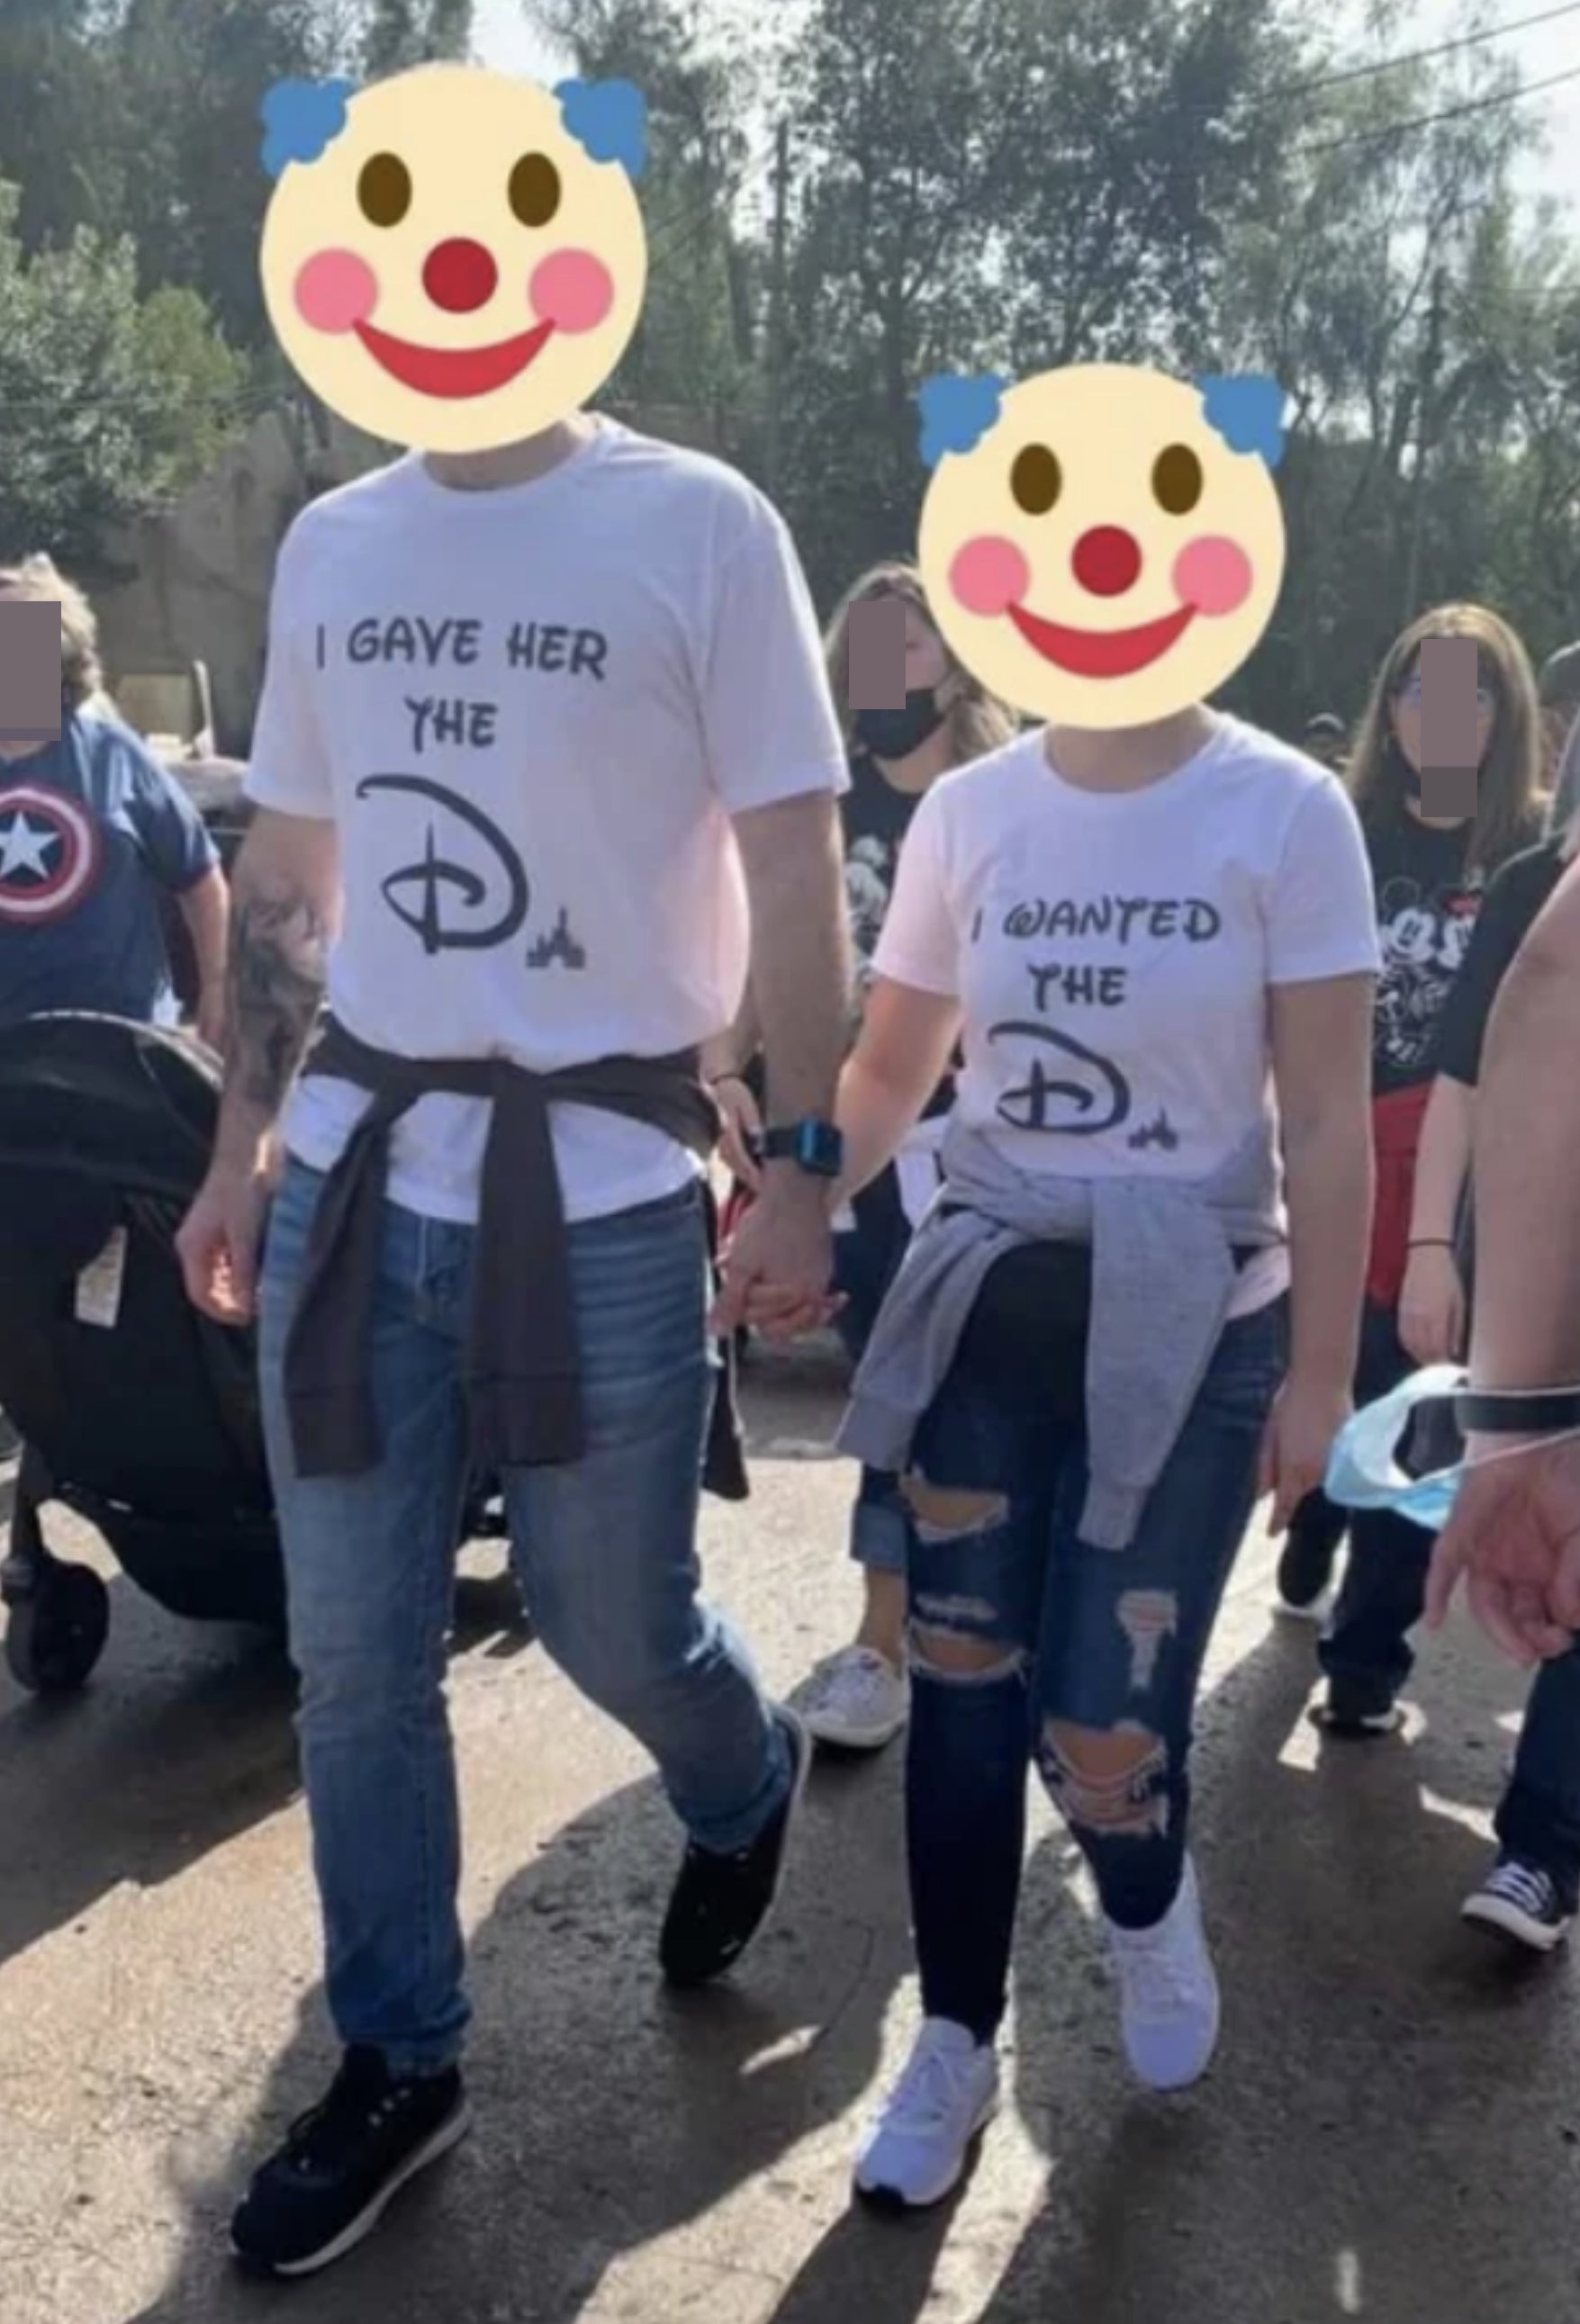 A couple wearing T-shirts, with the man&#x27;s shirt saying &quot;I gave her the D&quot; and the woman&#x27;s shirt saying &quot;I wanted the D,&quot; with both D&#x27;s written in the Disney style